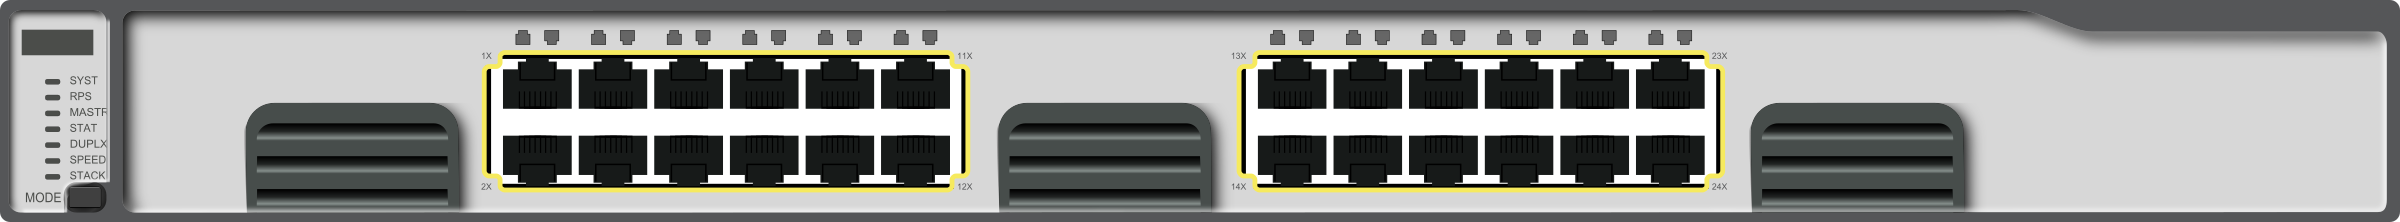 Gigabit Layer 3 Switch #2 PNG icon